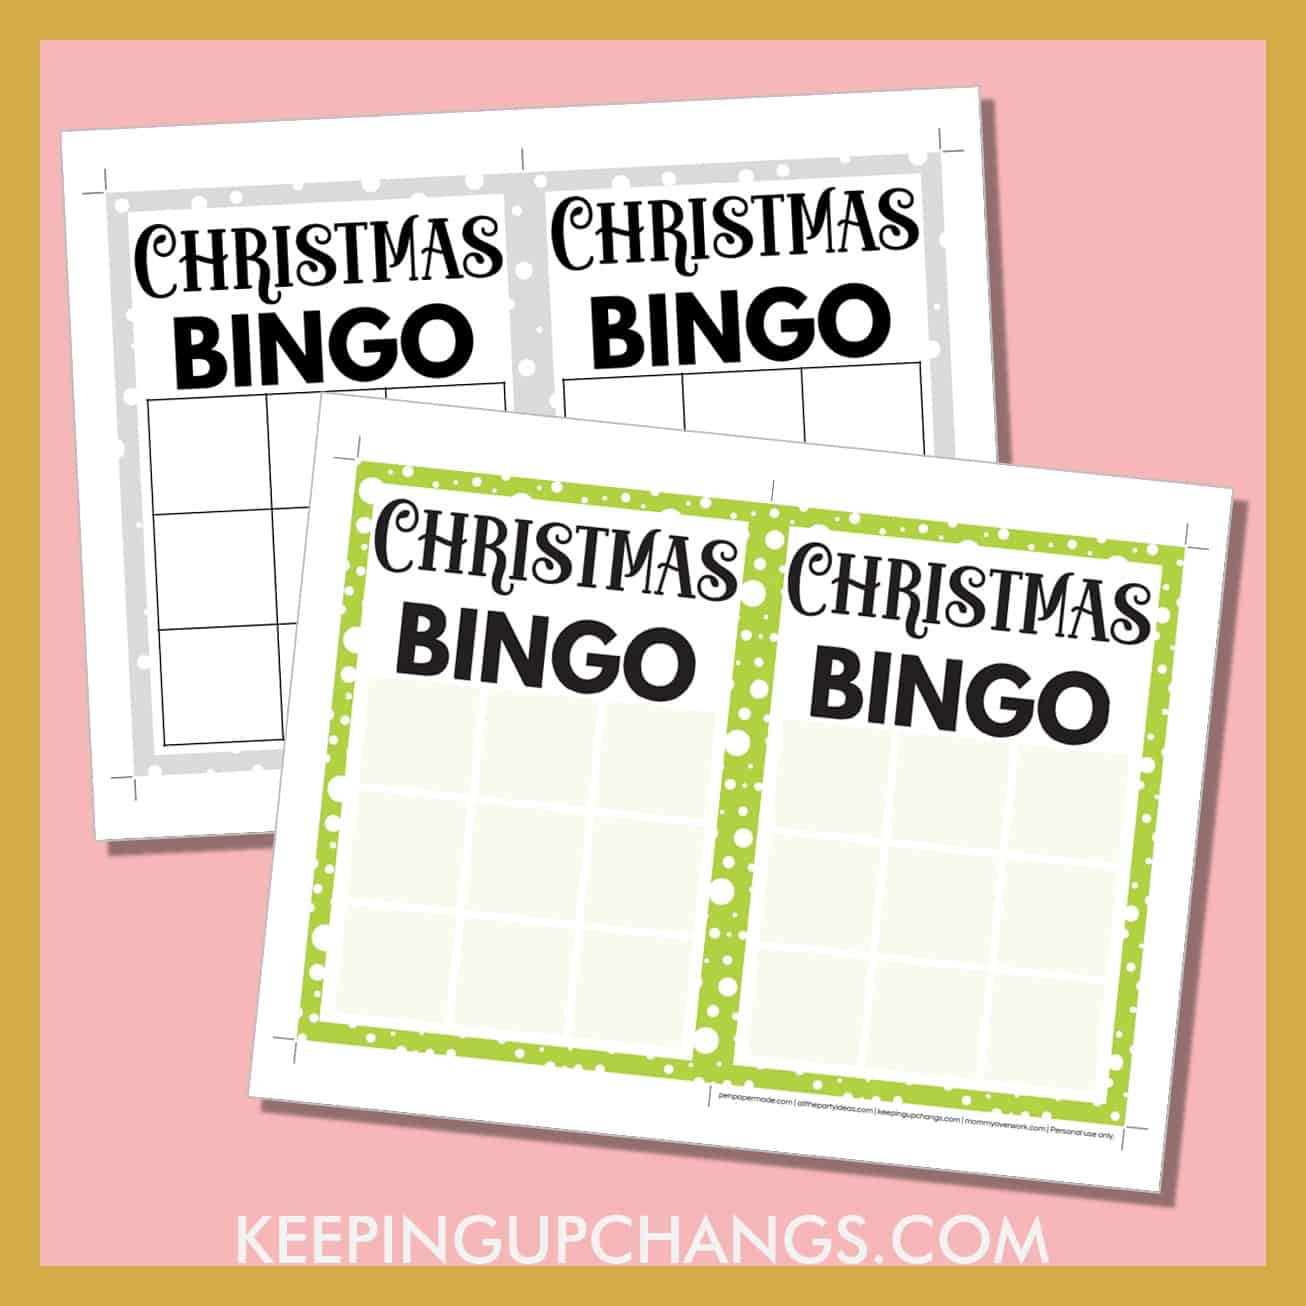 free christmas bingo 3x3 grid game board blank template in color, black and white.